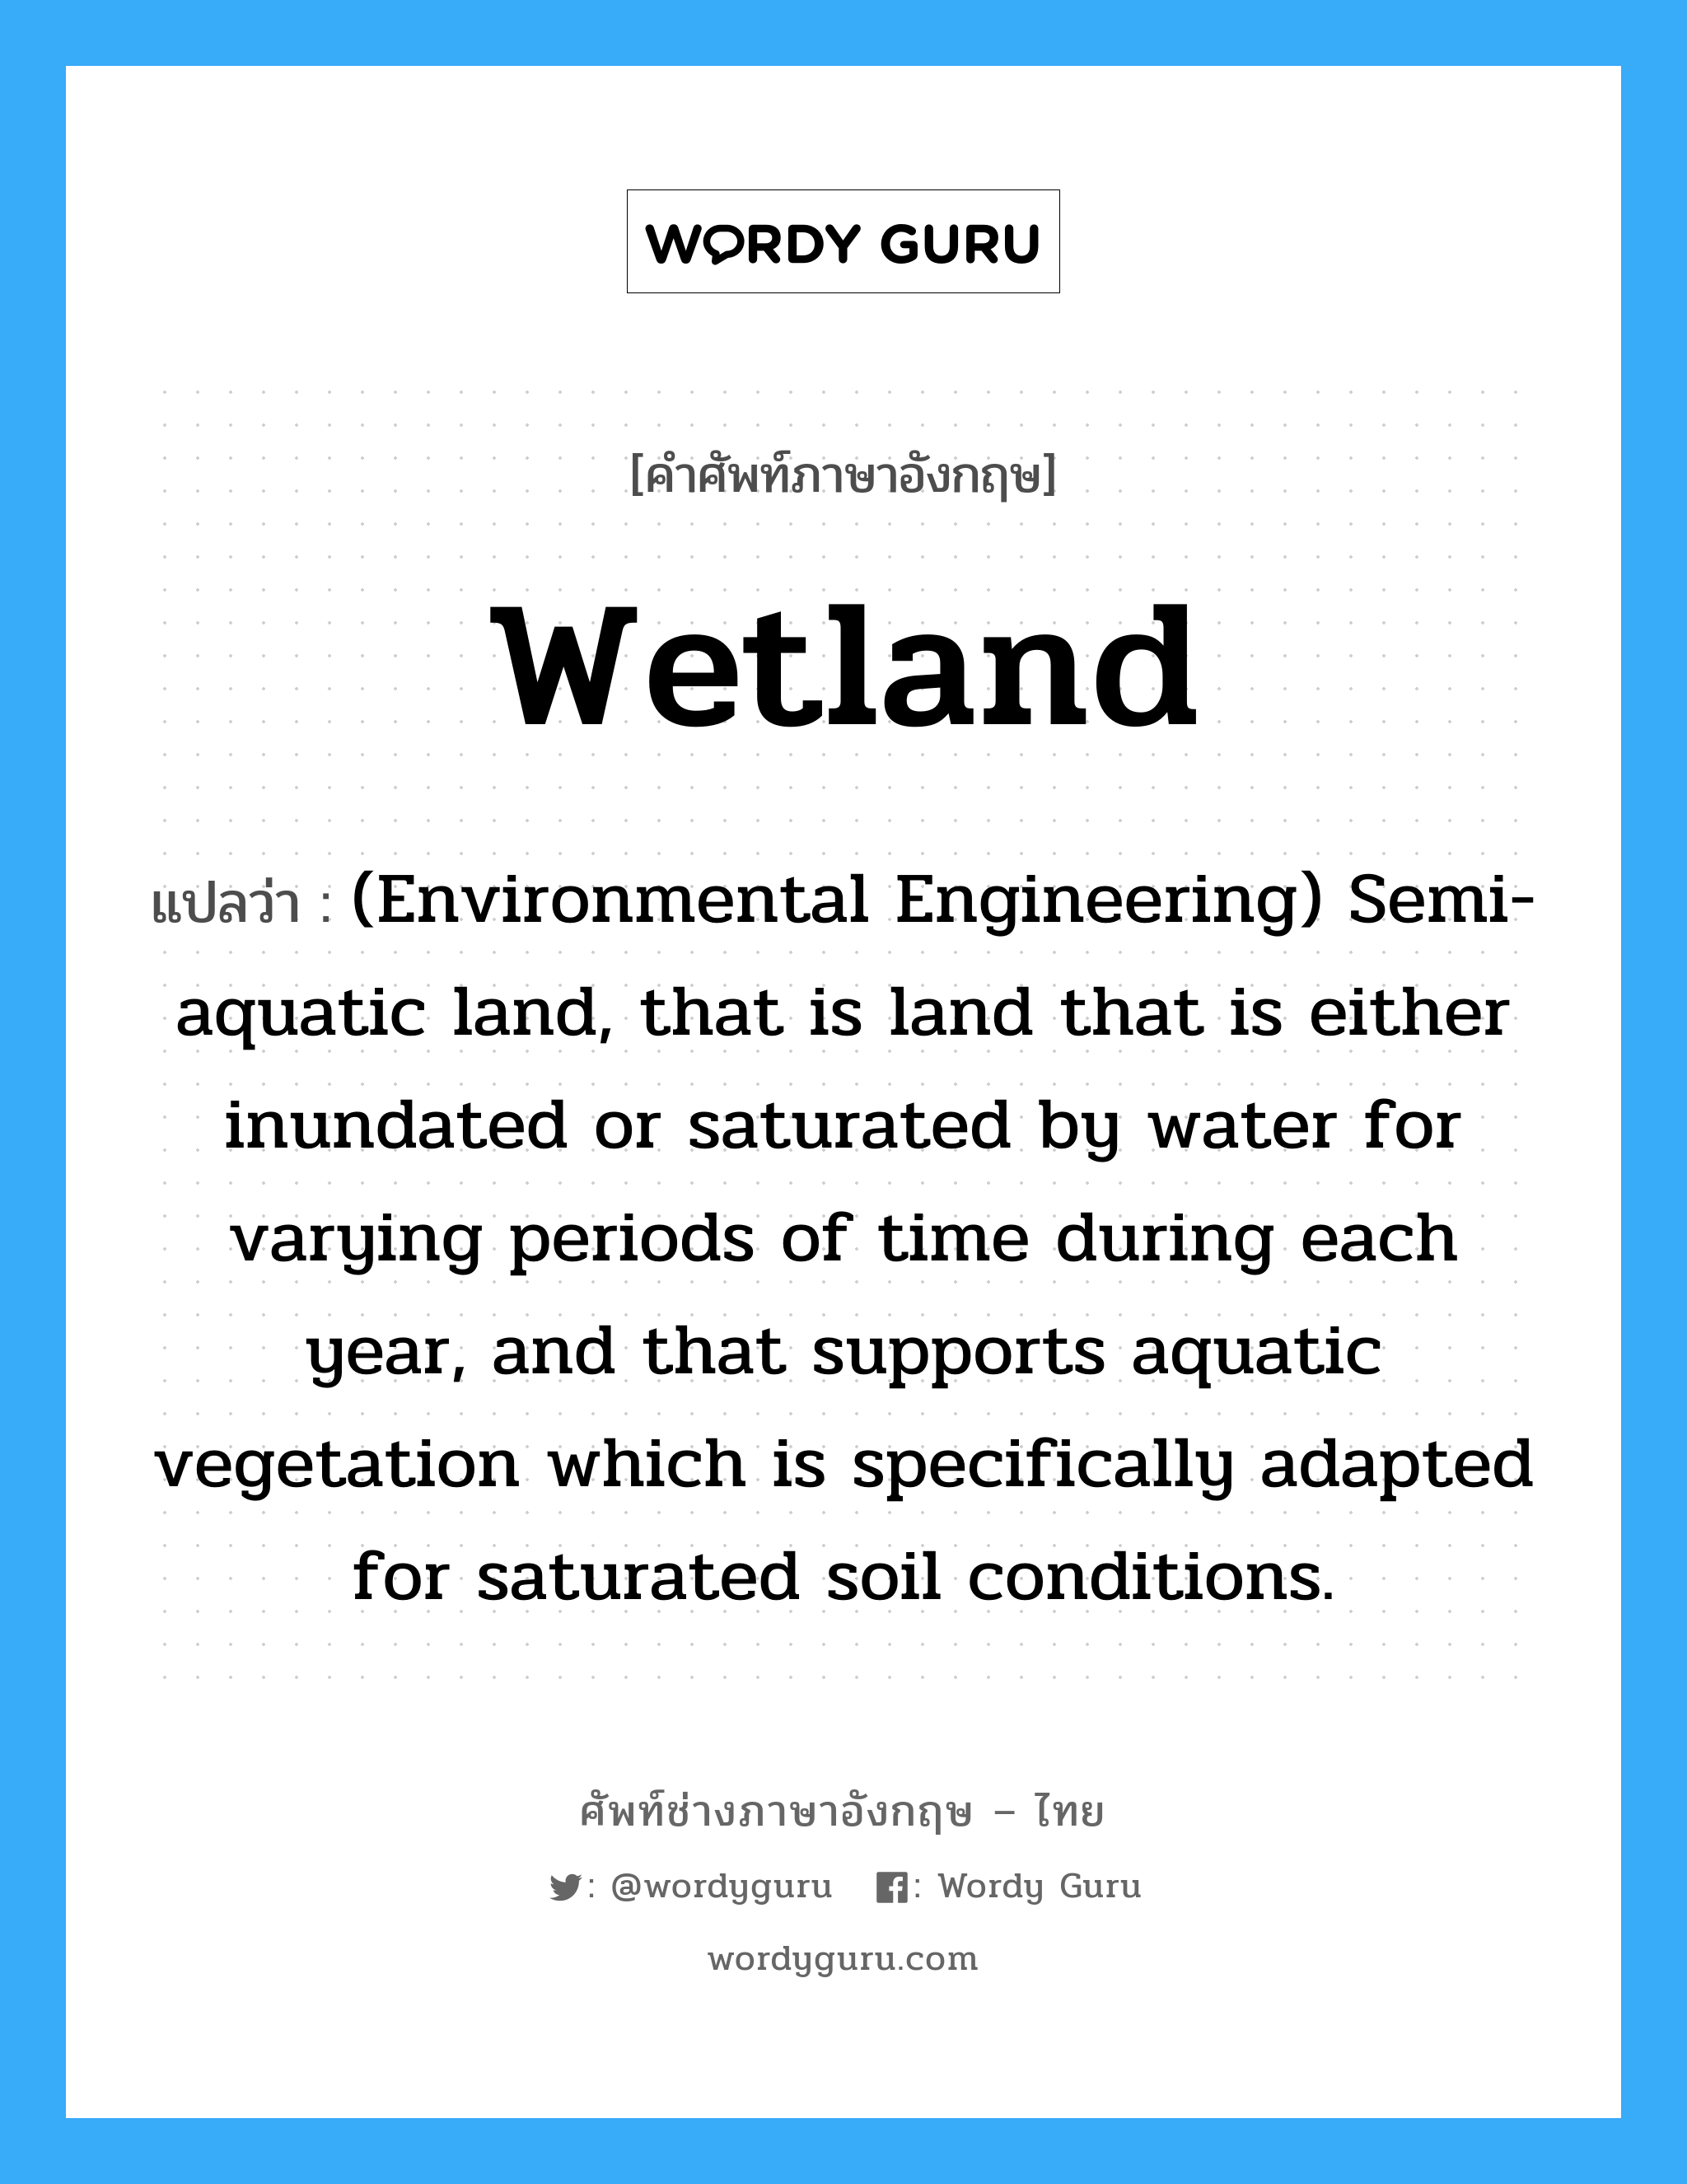 (Environmental Engineering) Semi-aquatic land, that is land that is either inundated or saturated by water for varying periods of time during each year, and that supports aquatic vegetation which is specifically adapted for saturated soil conditions. ภาษาอังกฤษ?, คำศัพท์ช่างภาษาอังกฤษ - ไทย (Environmental Engineering) Semi-aquatic land, that is land that is either inundated or saturated by water for varying periods of time during each year, and that supports aquatic vegetation which is specifically adapted for saturated soil conditions. คำศัพท์ภาษาอังกฤษ (Environmental Engineering) Semi-aquatic land, that is land that is either inundated or saturated by water for varying periods of time during each year, and that supports aquatic vegetation which is specifically adapted for saturated soil conditions. แปลว่า Wetland